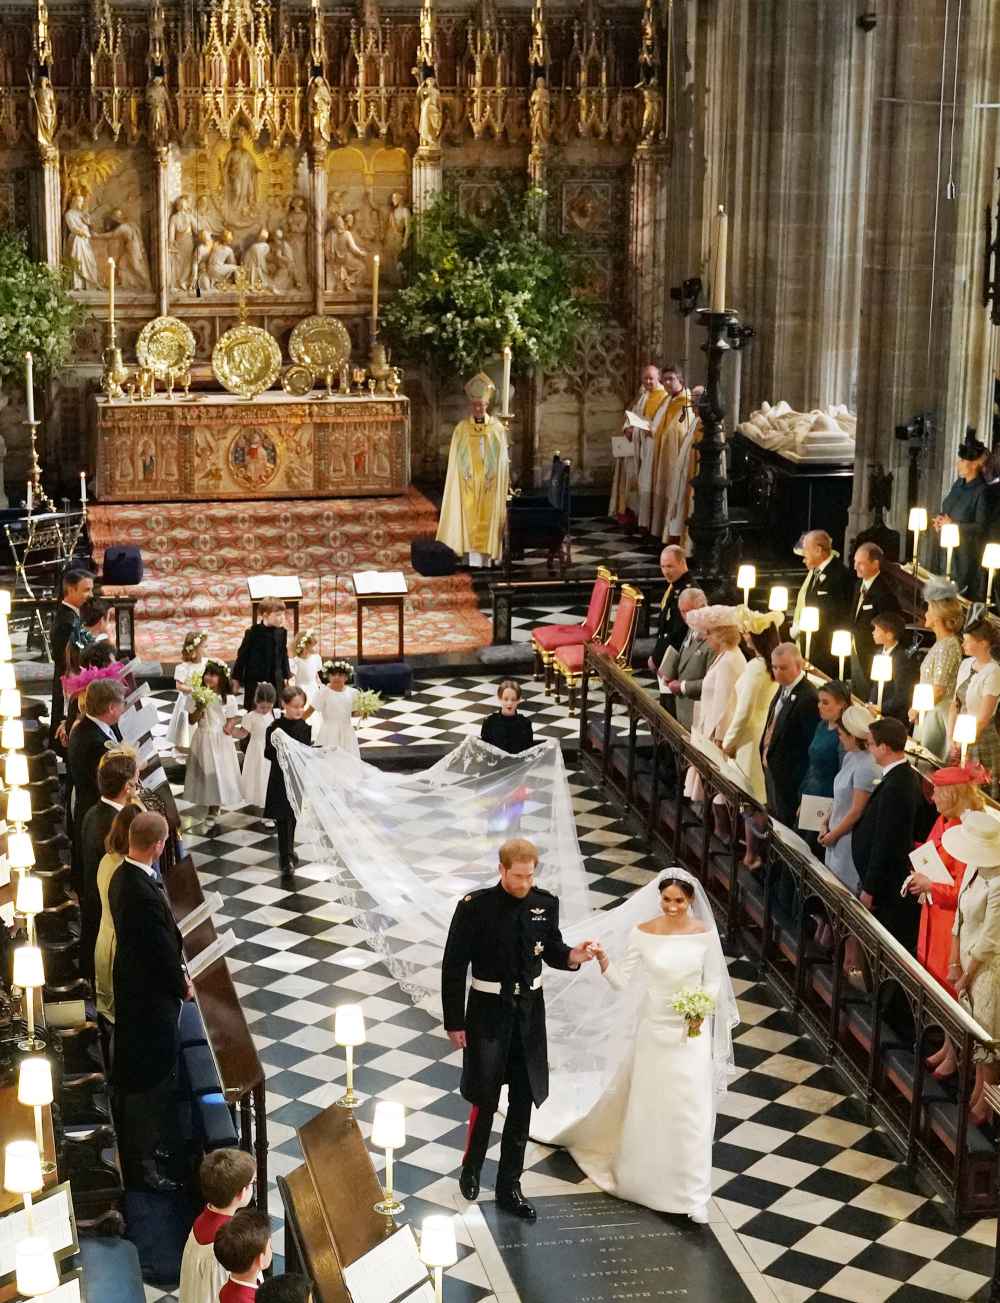 Britain's Prince Harry, Duke of Sussex (L) and Britain's Meghan Markle, Duchess of Sussex, (R) walk away from the High Altar